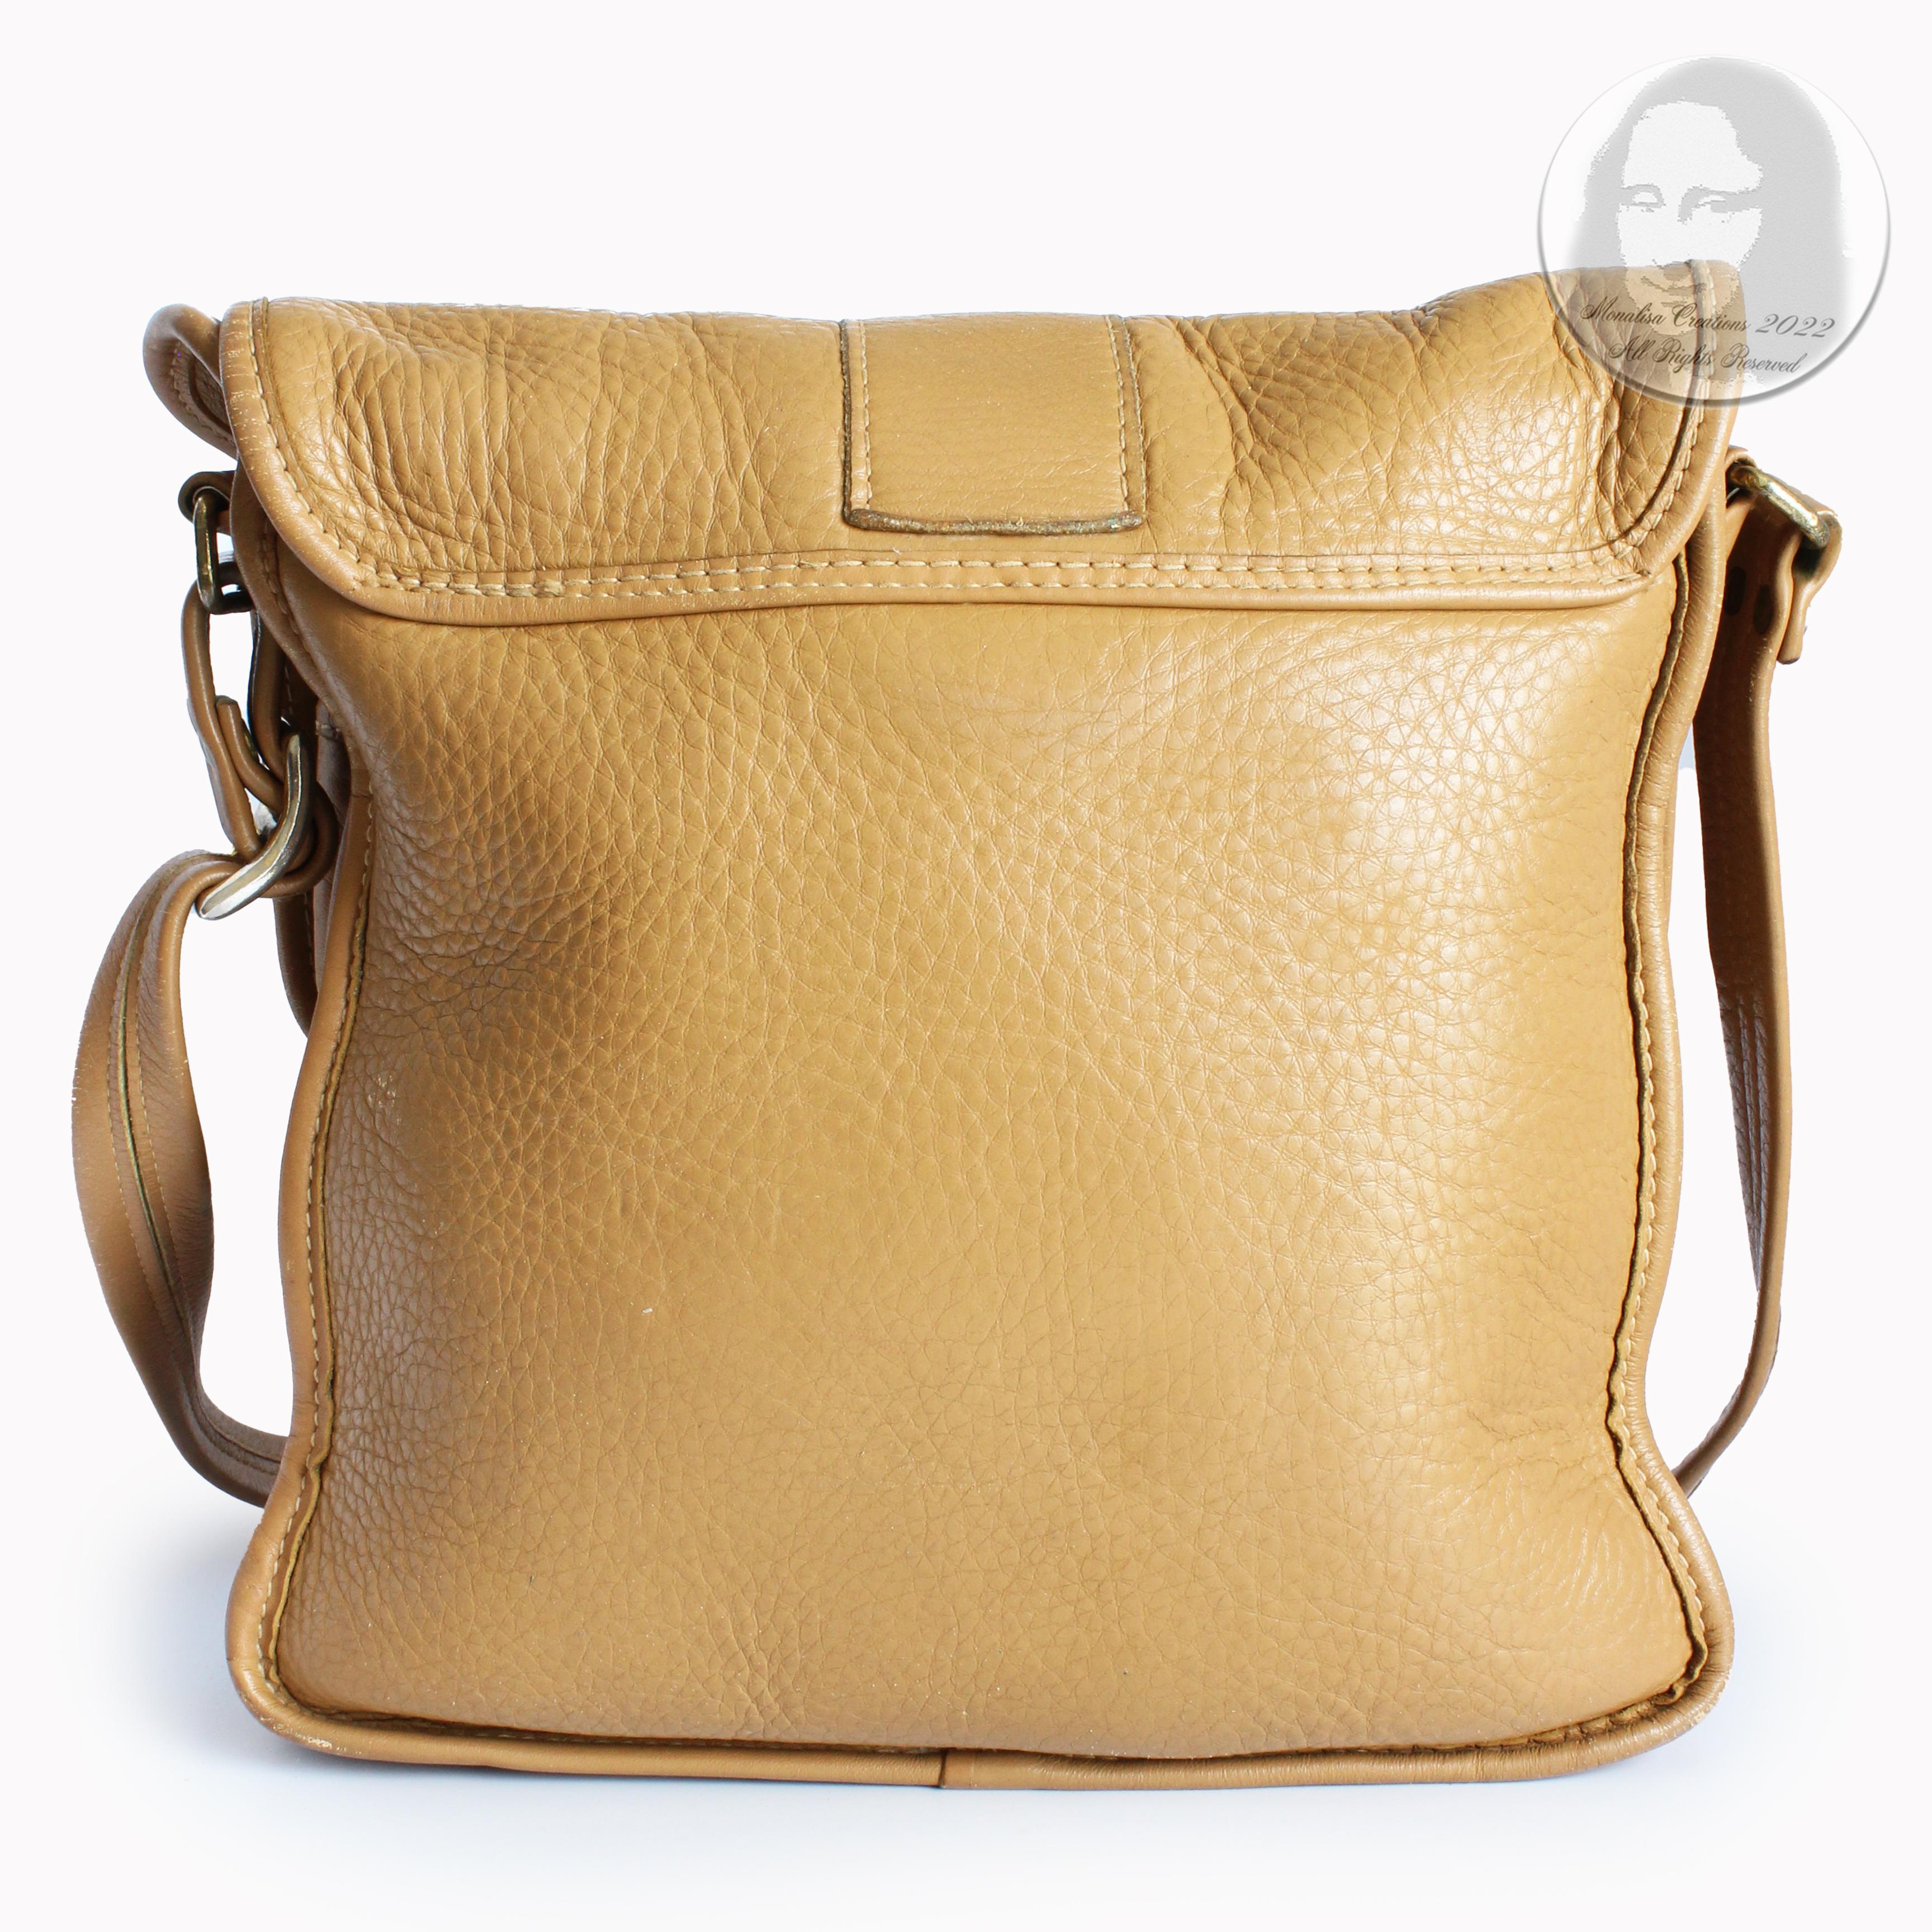 Women's or Men's Bonnie Cashin Messenger Bag with Double Turnlock Flap Tan Leather Rare 1970s